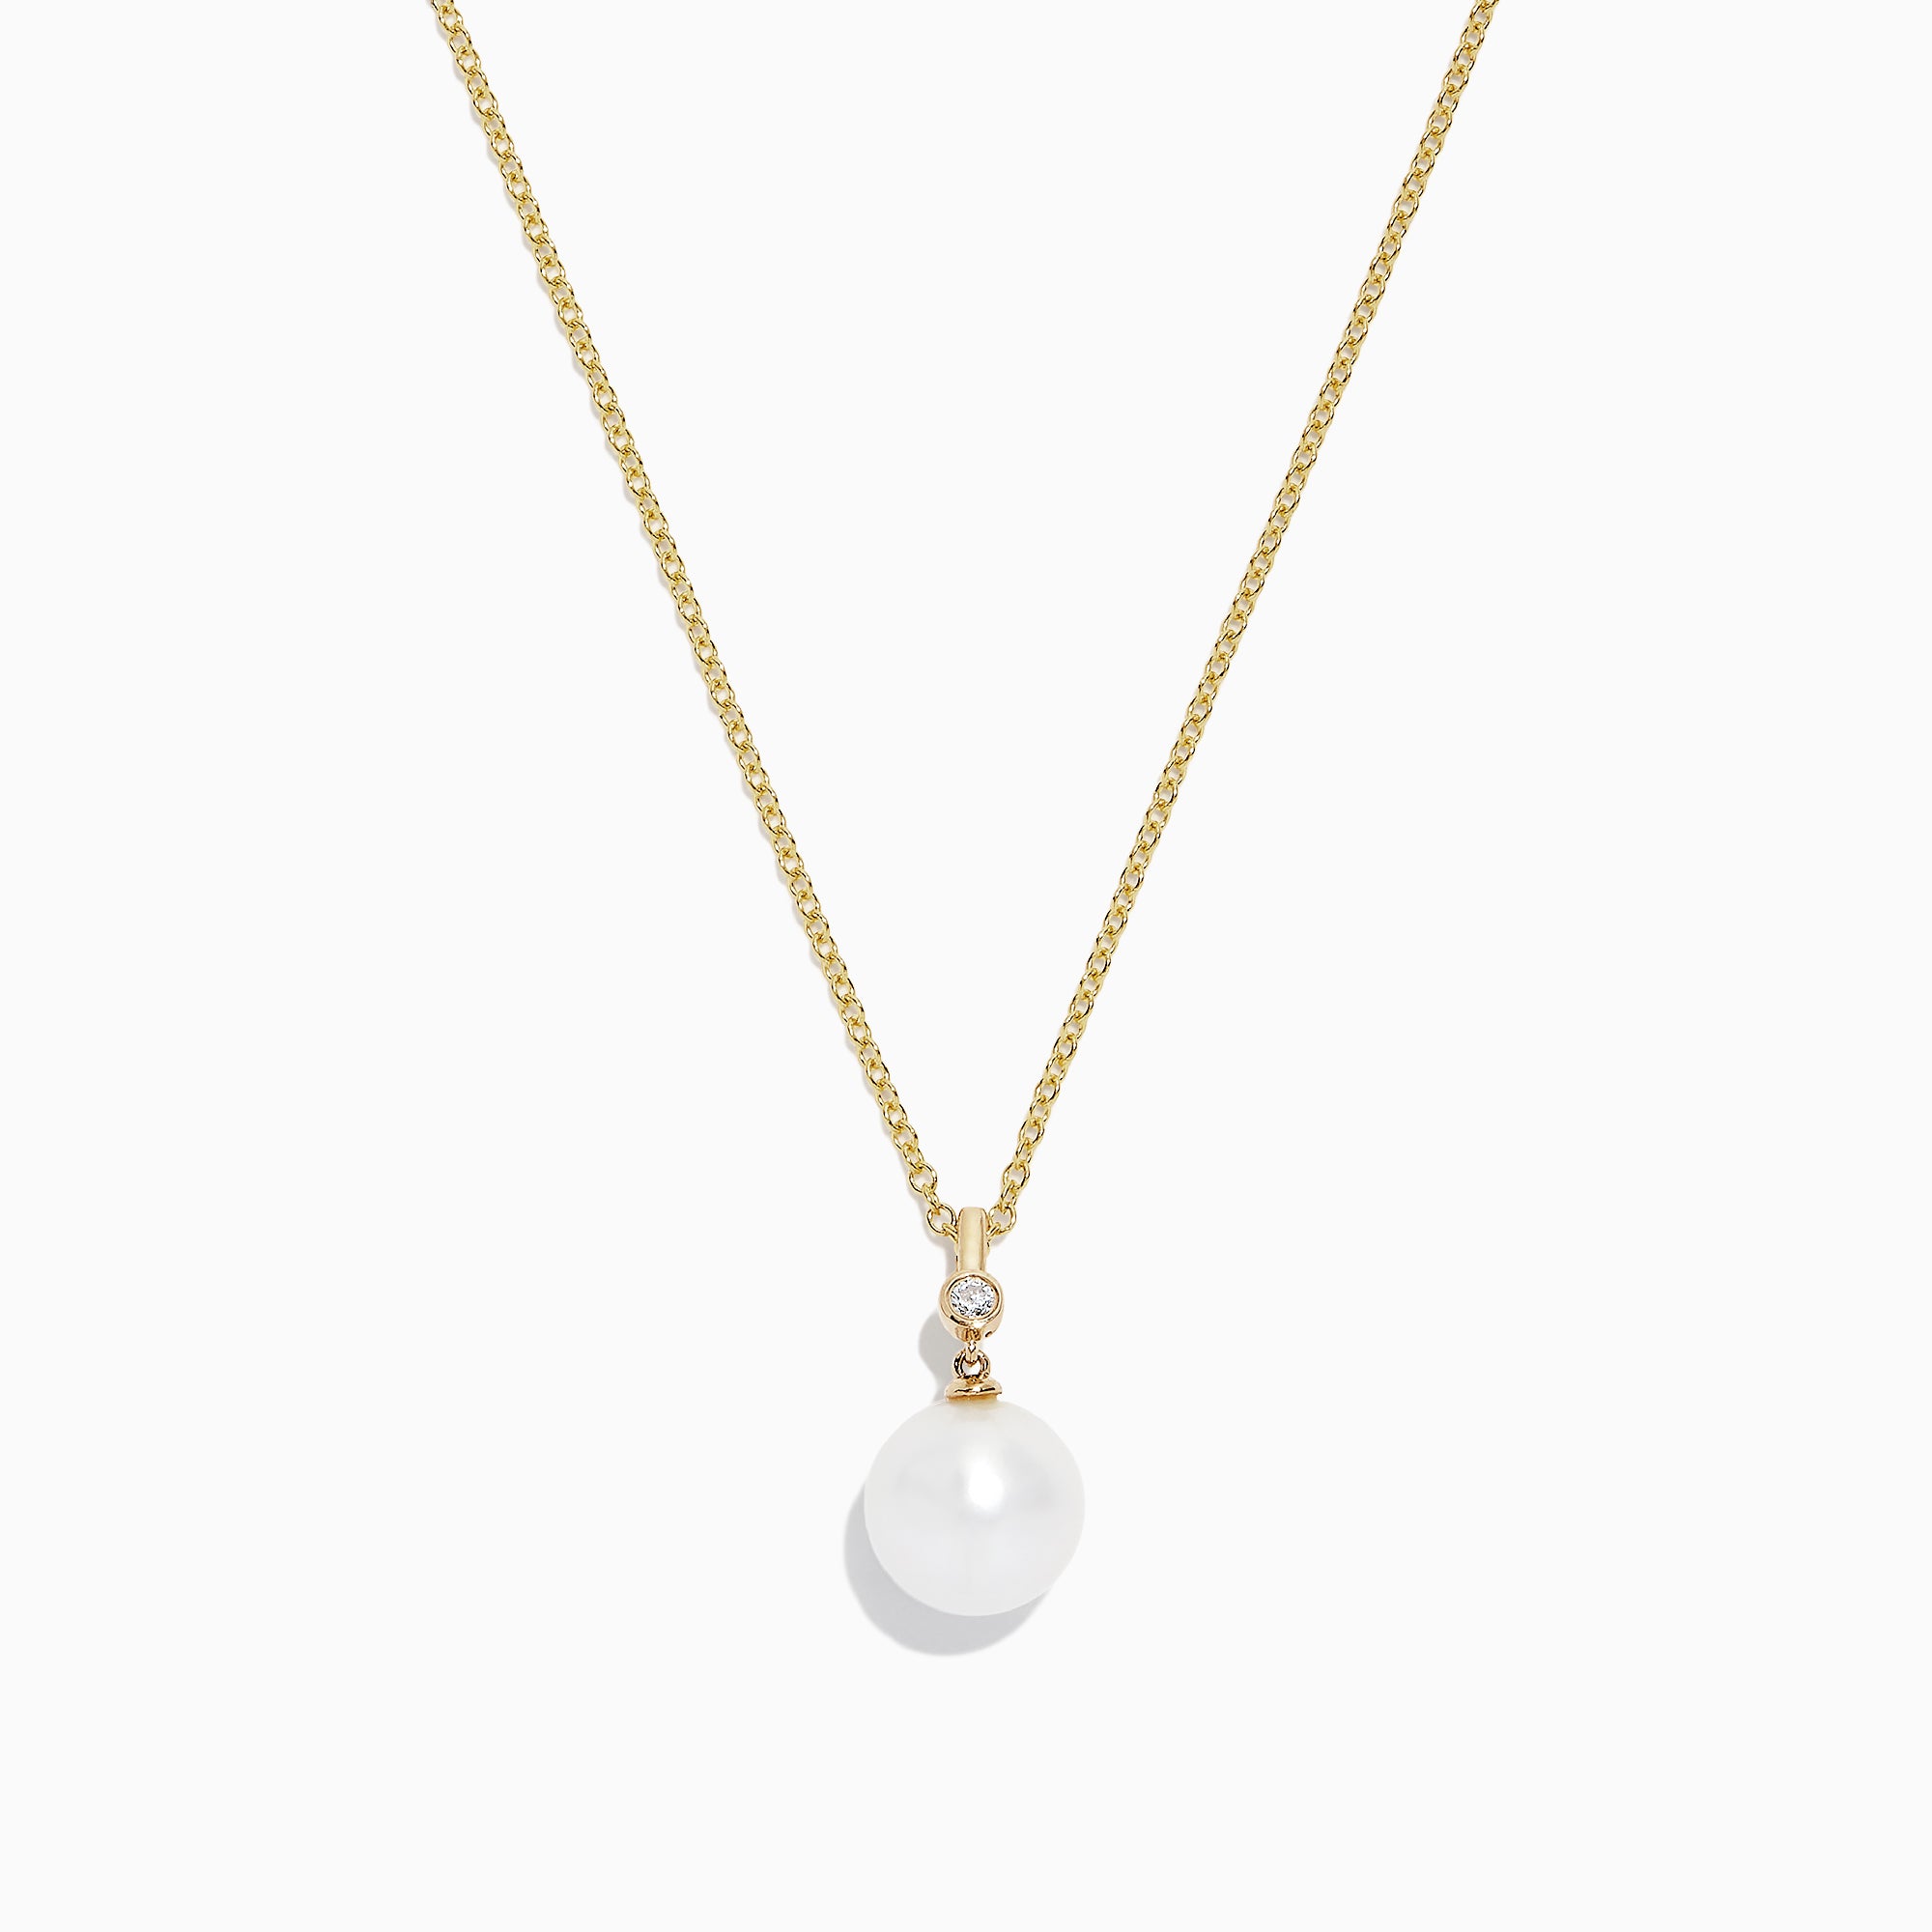 Amazon.com: The Pearl Source Real Pearl Necklace for Women with AAA+  Quality Round White Freshwater Genuine Cultured Pearls | 18 inch Pearl  Strand with 14K Gold Clasp: Clothing, Shoes & Jewelry